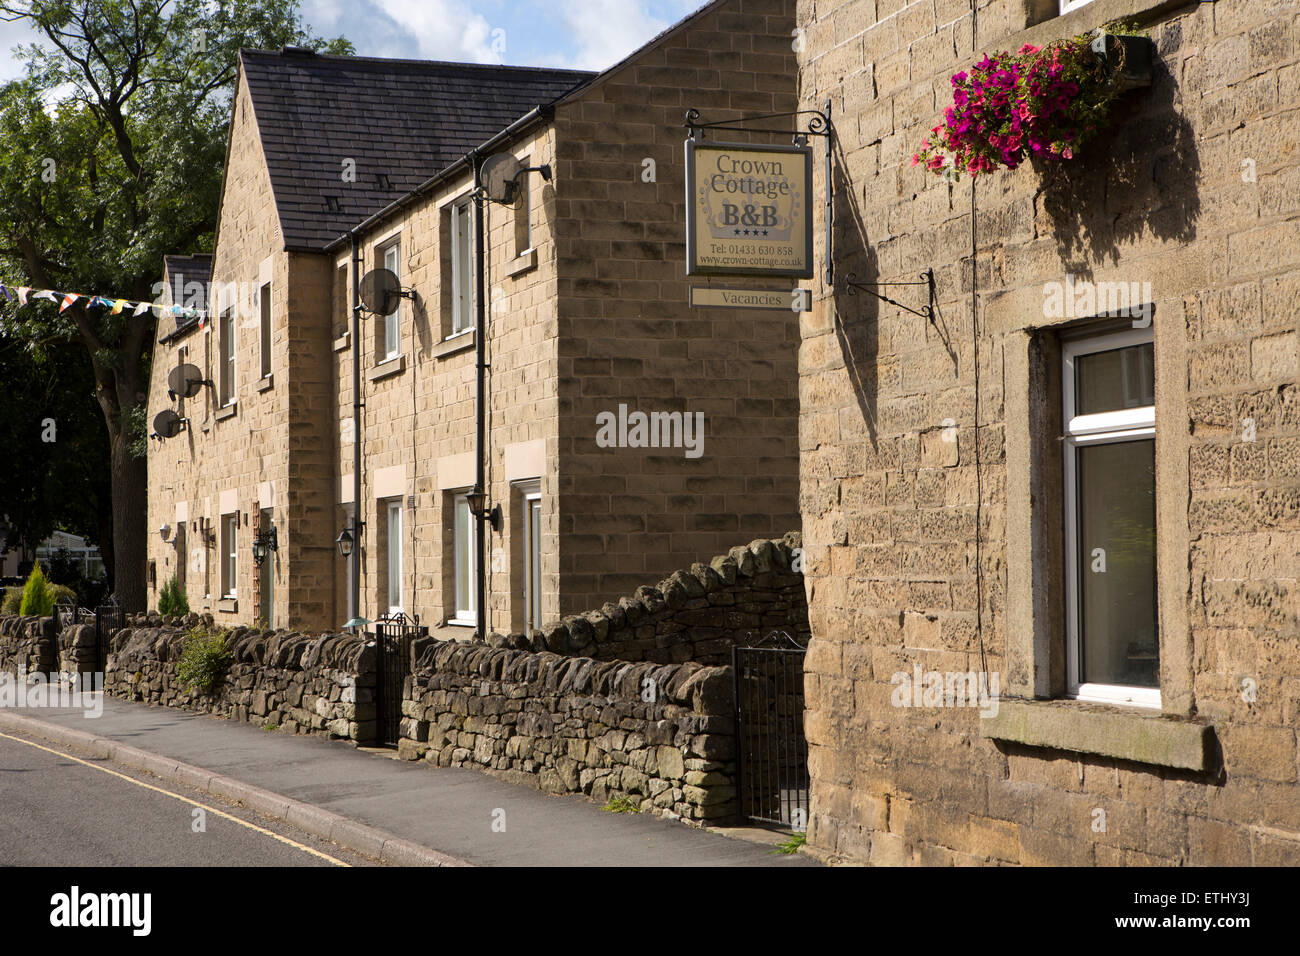 UK, England, Derbyshire, Eyam, Crown Cottage B&B and houses in Church Street Stock Photo